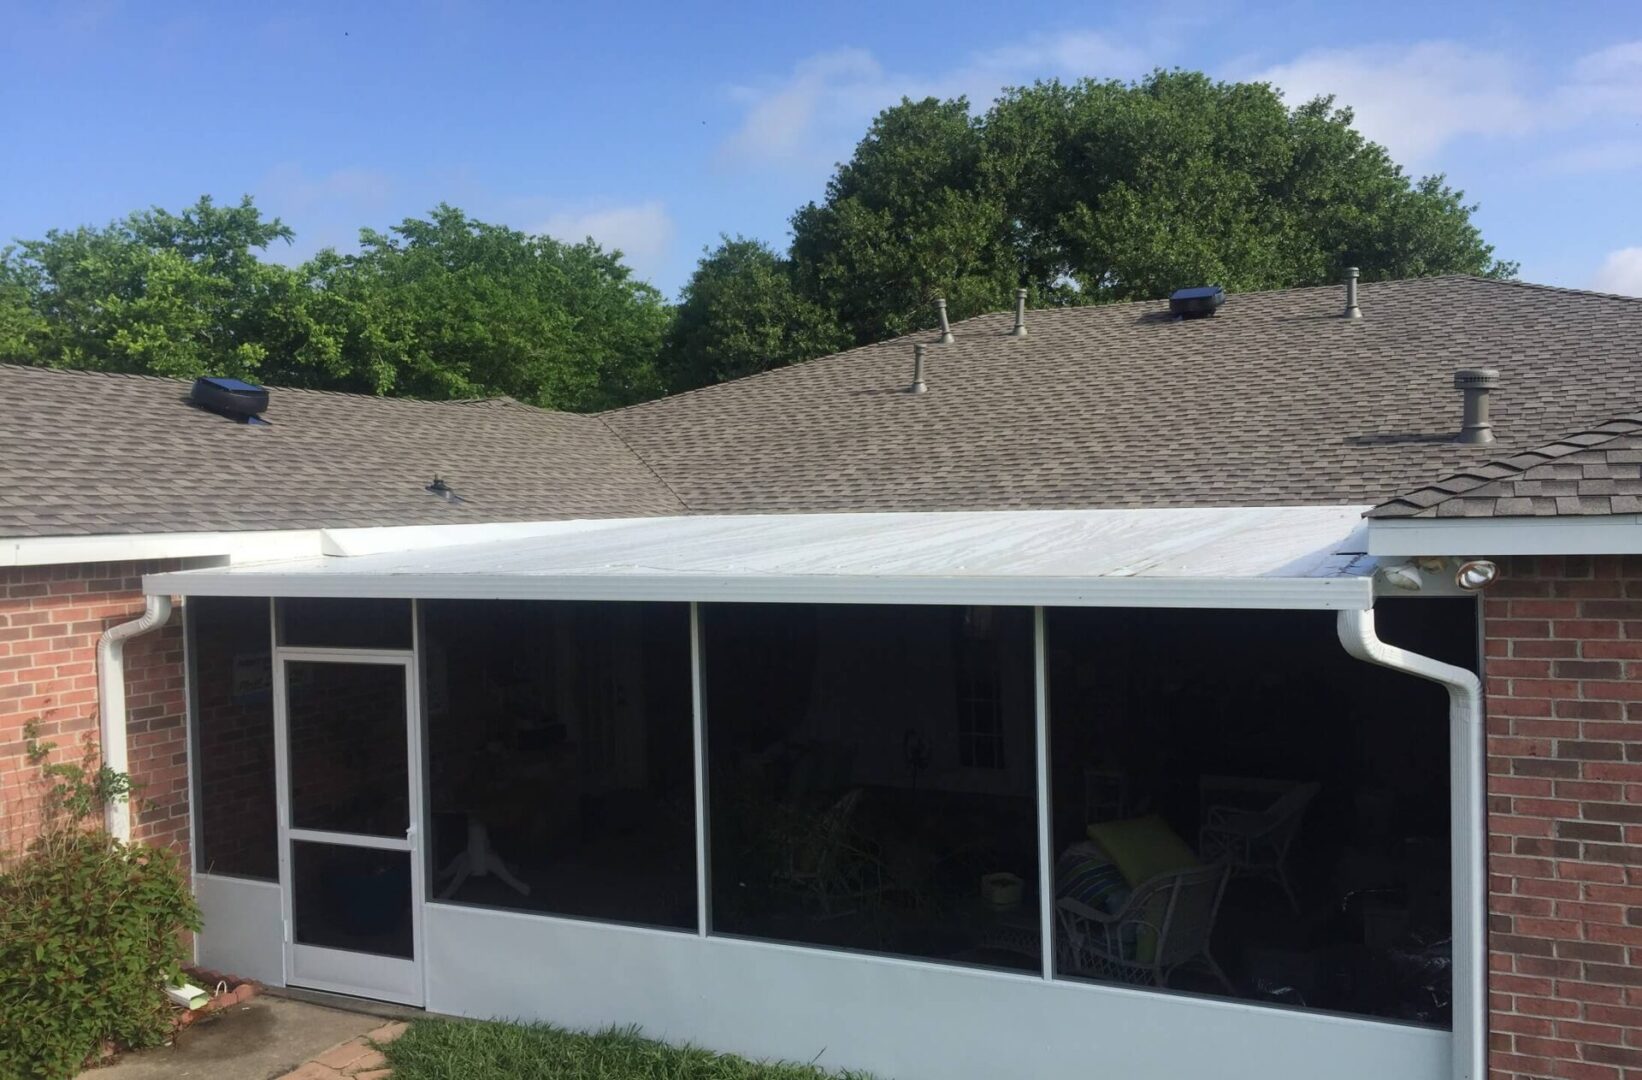 Final Touch Roofing & Remodeling